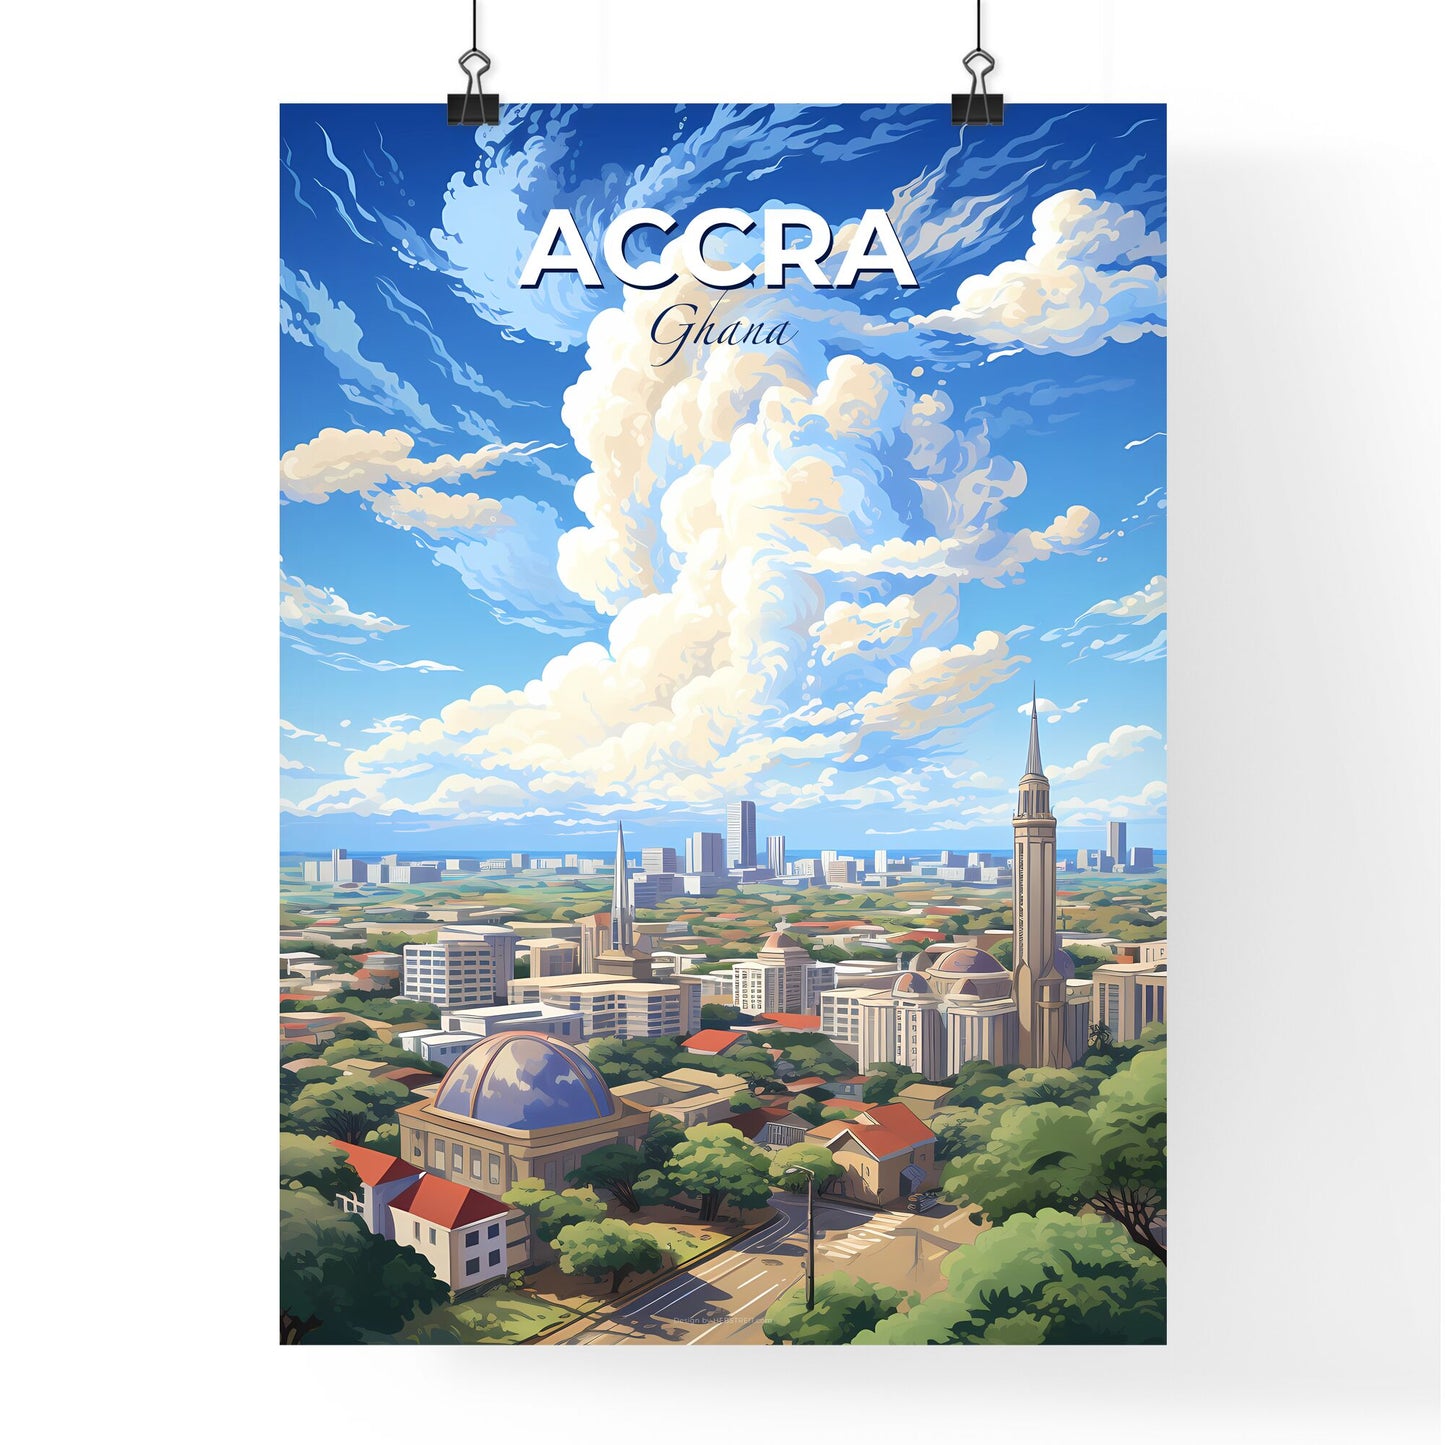 Accra Ghana Skyline - A City Landscape With A Large Cloud In The Sky - Customizable Travel Gift Default Title